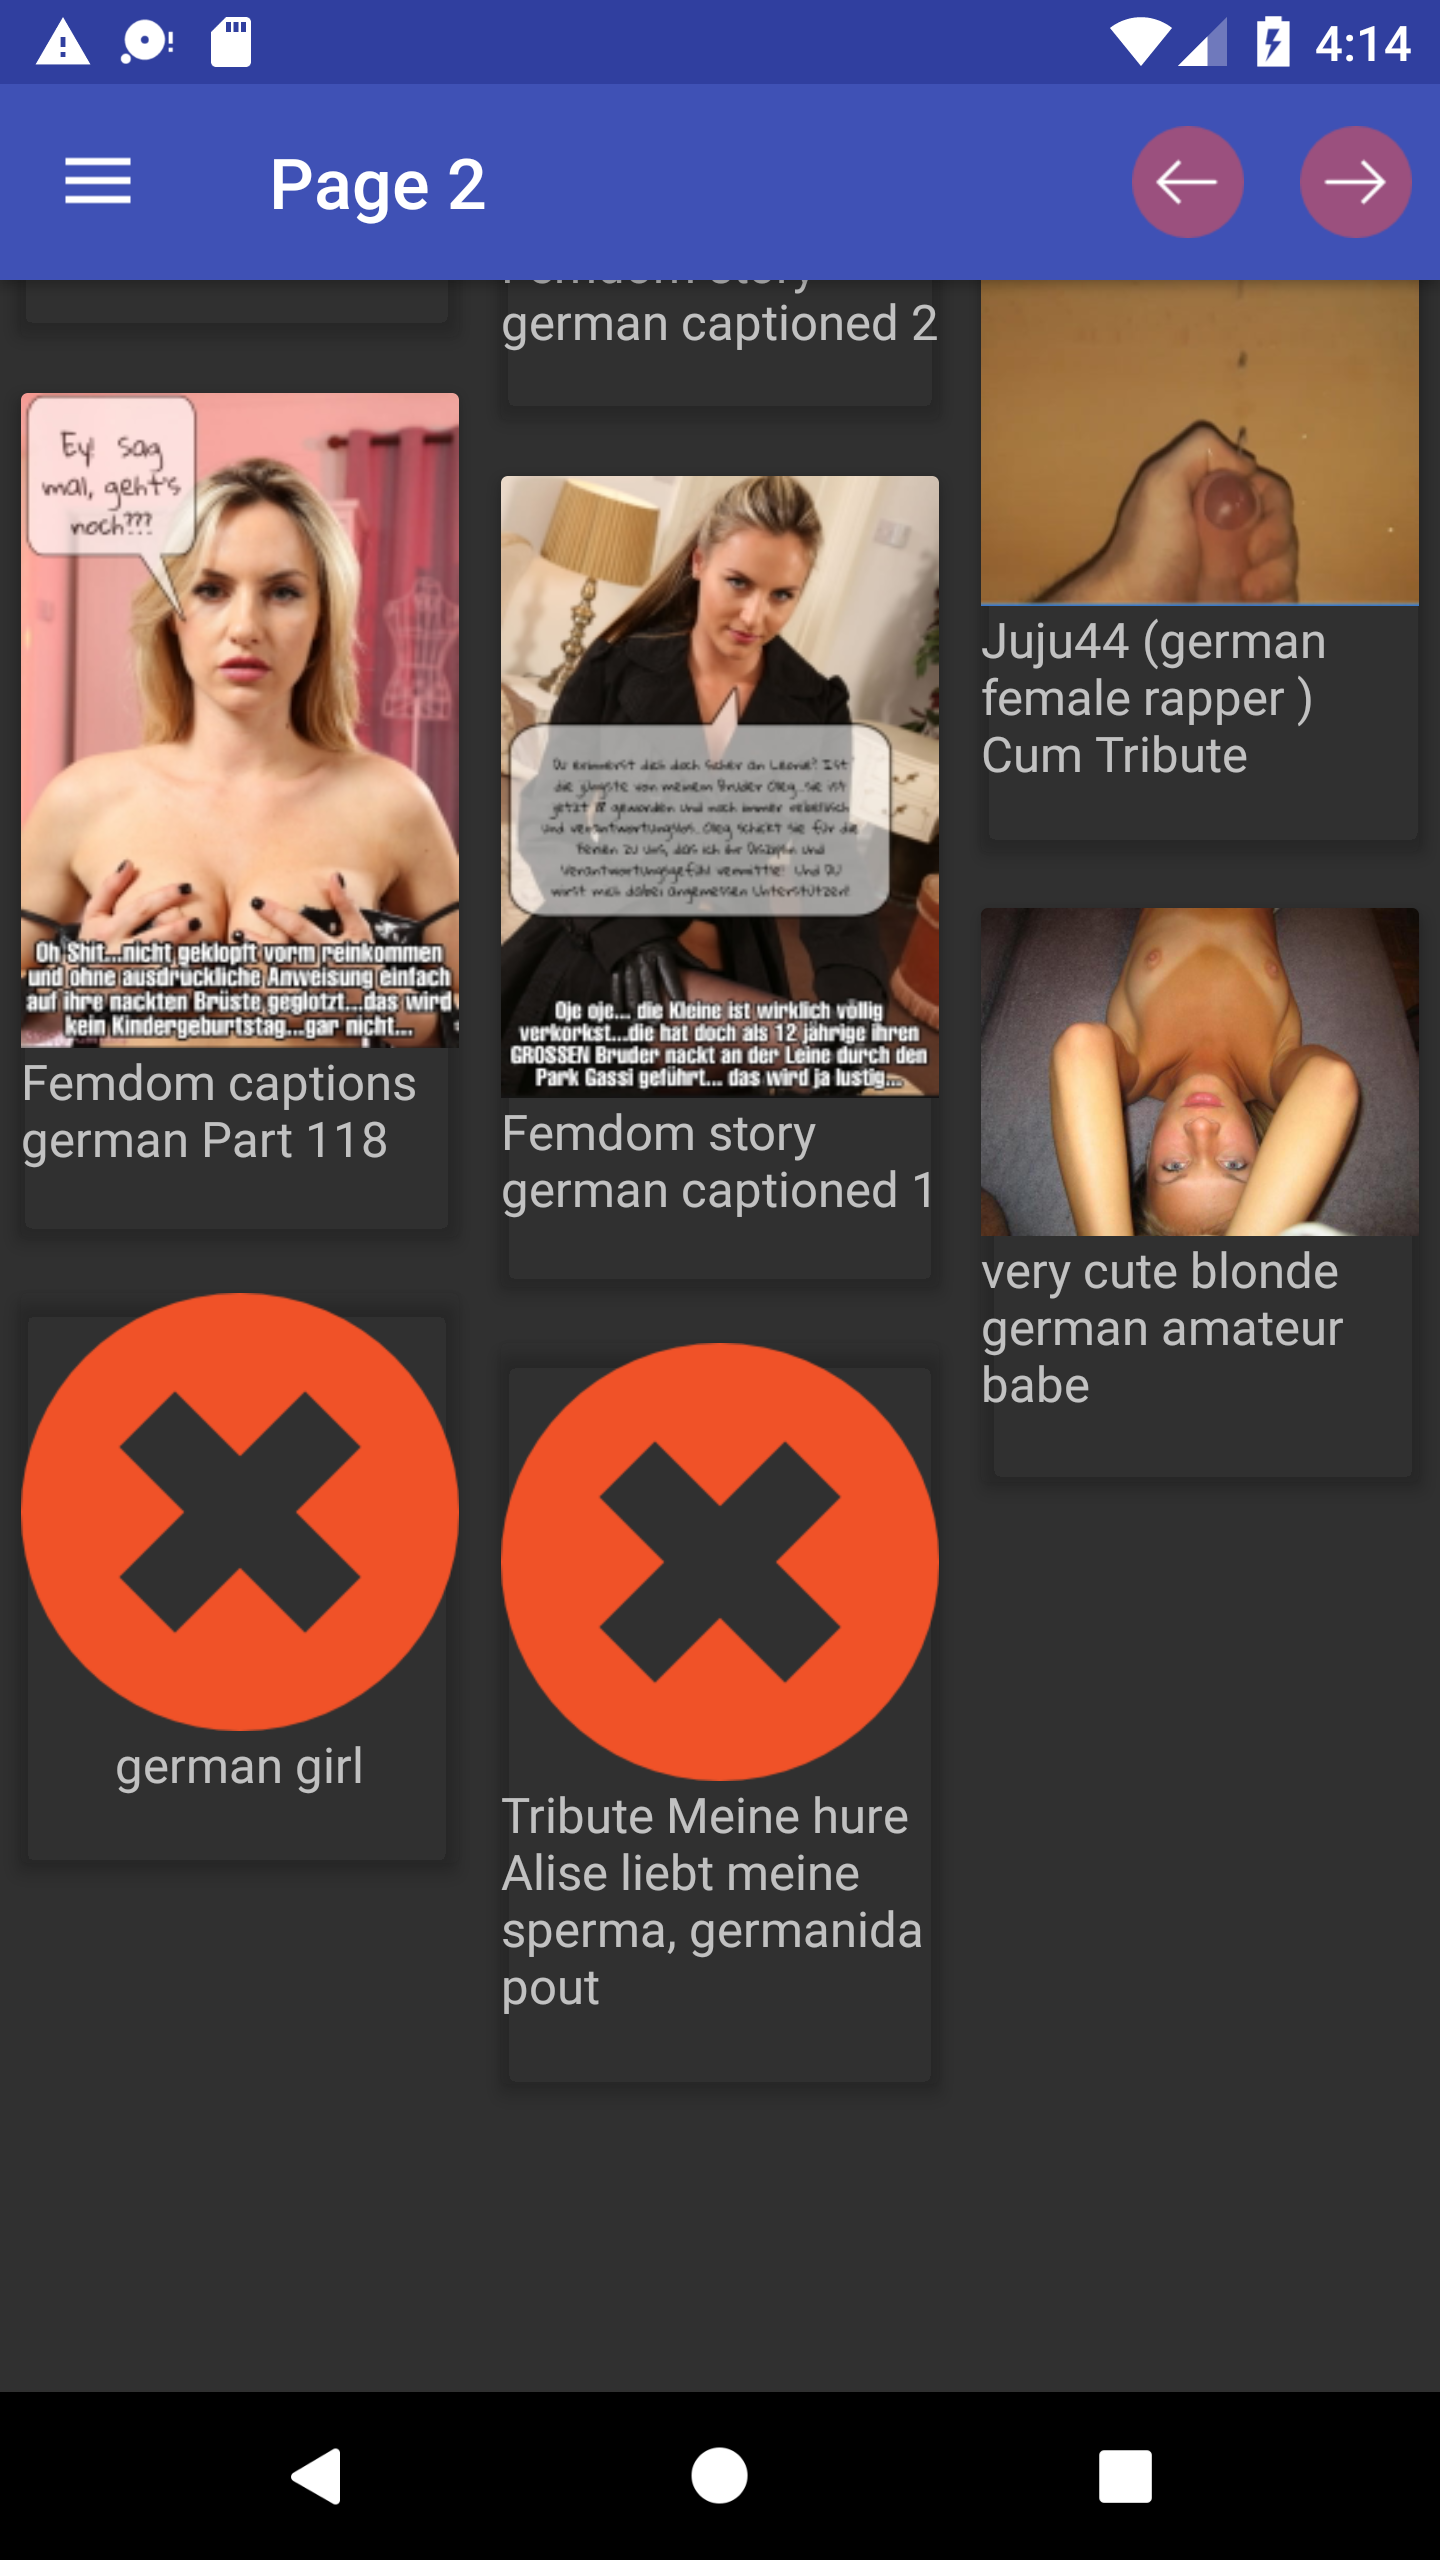 German Porn porn,pornstars,app,hentai,pictures,lily,free,pornstar,lane,images,pics,galleries,hot,sexy,mobile,with,gallery,apps,collection,pic,download,image